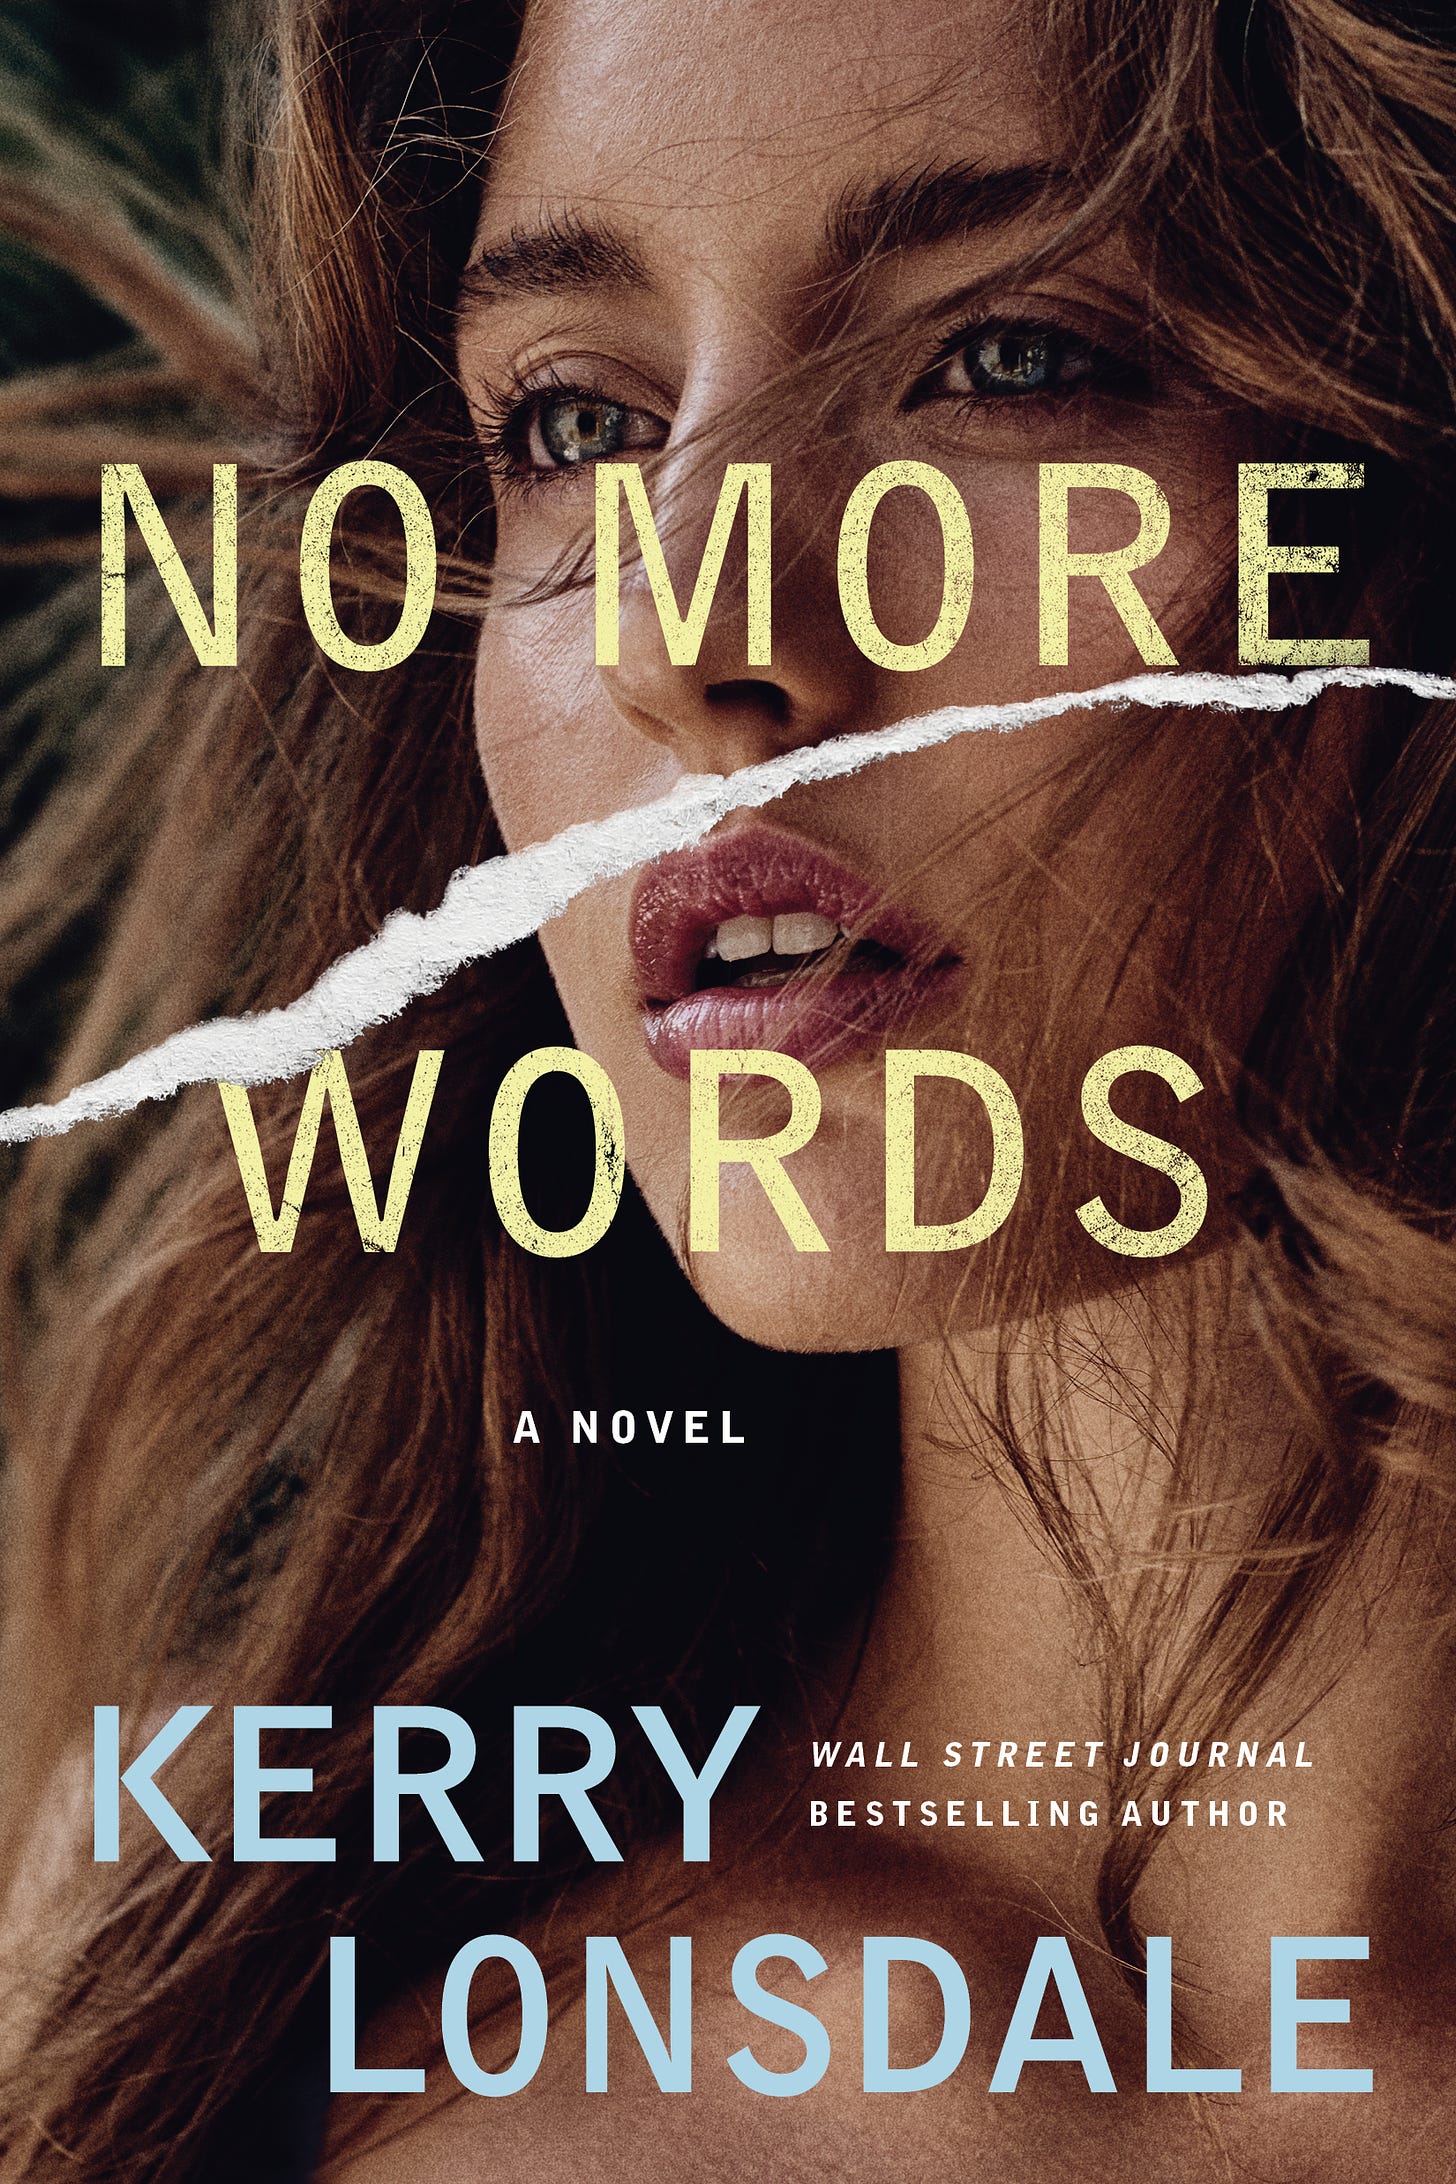 Image of Book Cover for No More Words by Kerry Lonsdale